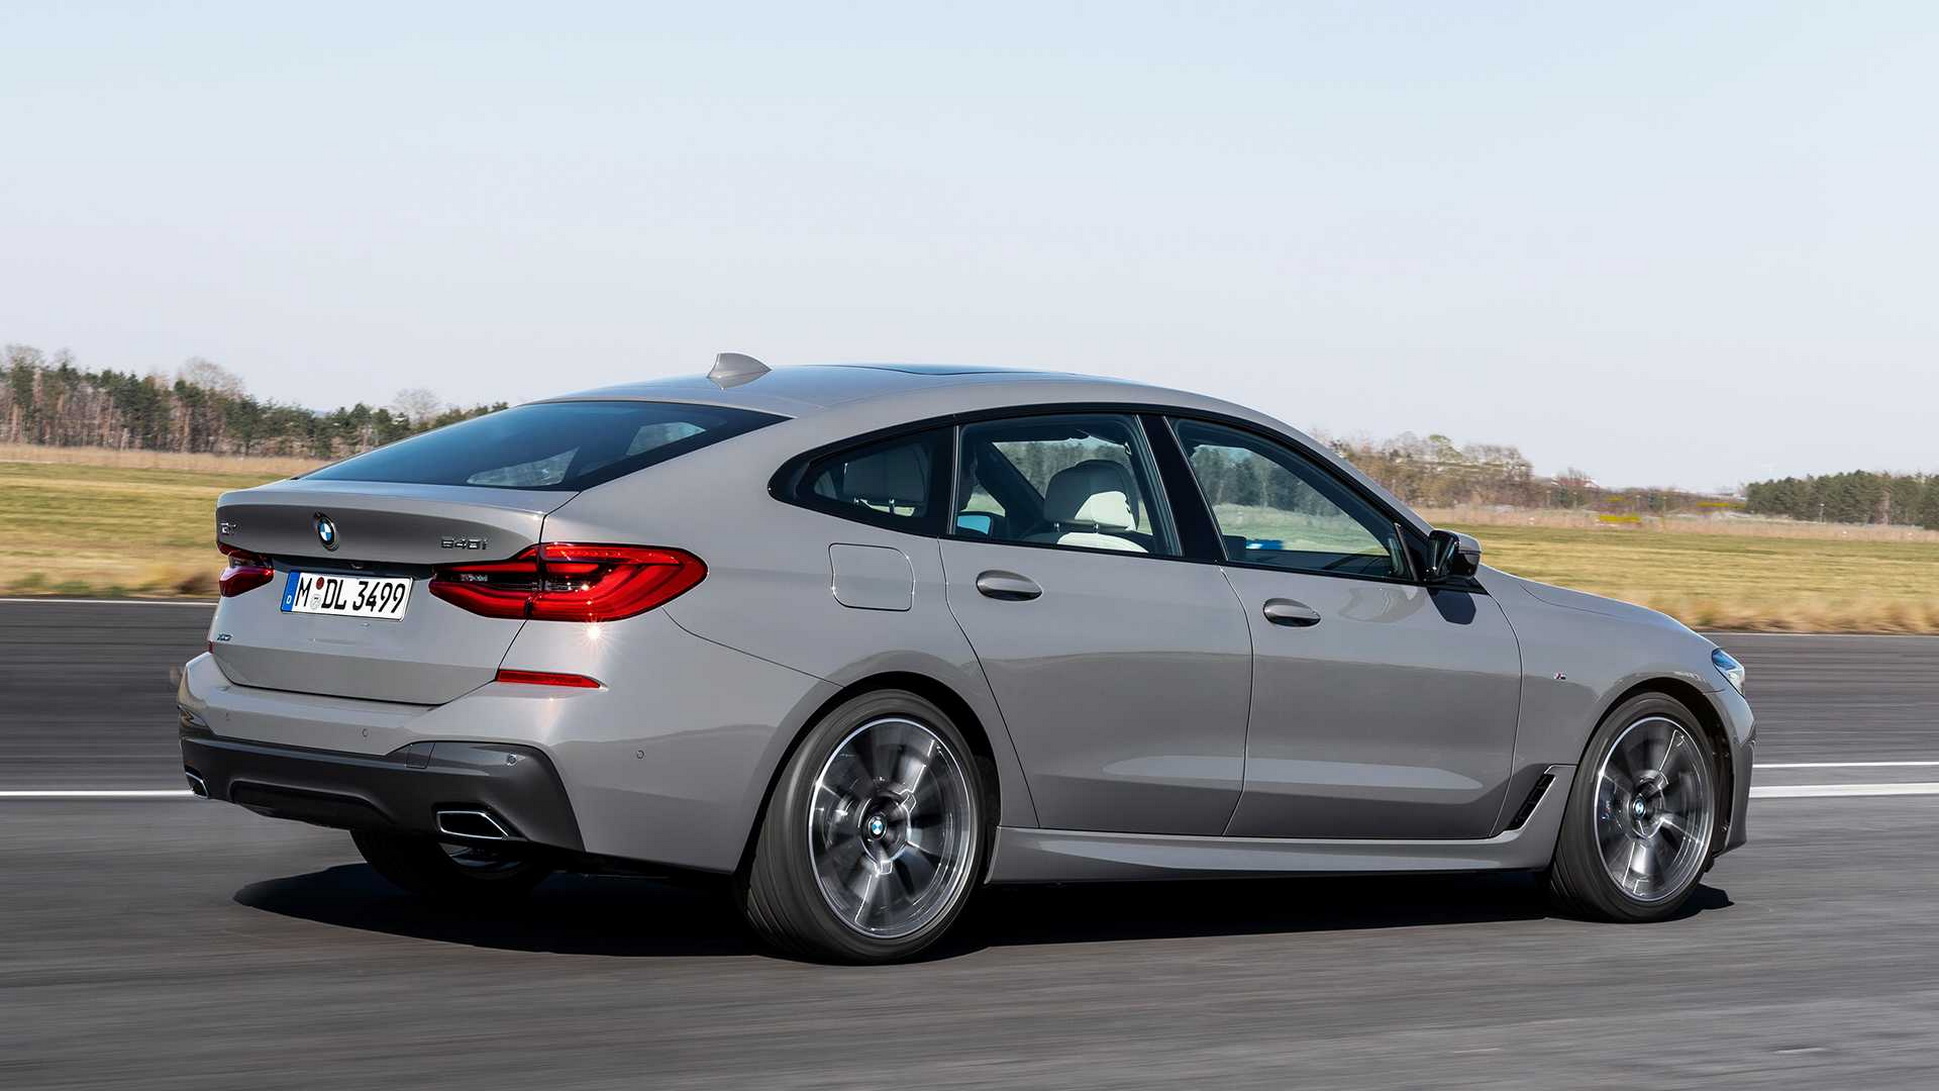 21 Bmw 6 Series Gt Gets A Mild Facelift But Falls Victim To Suvs In The Uk Carscoops